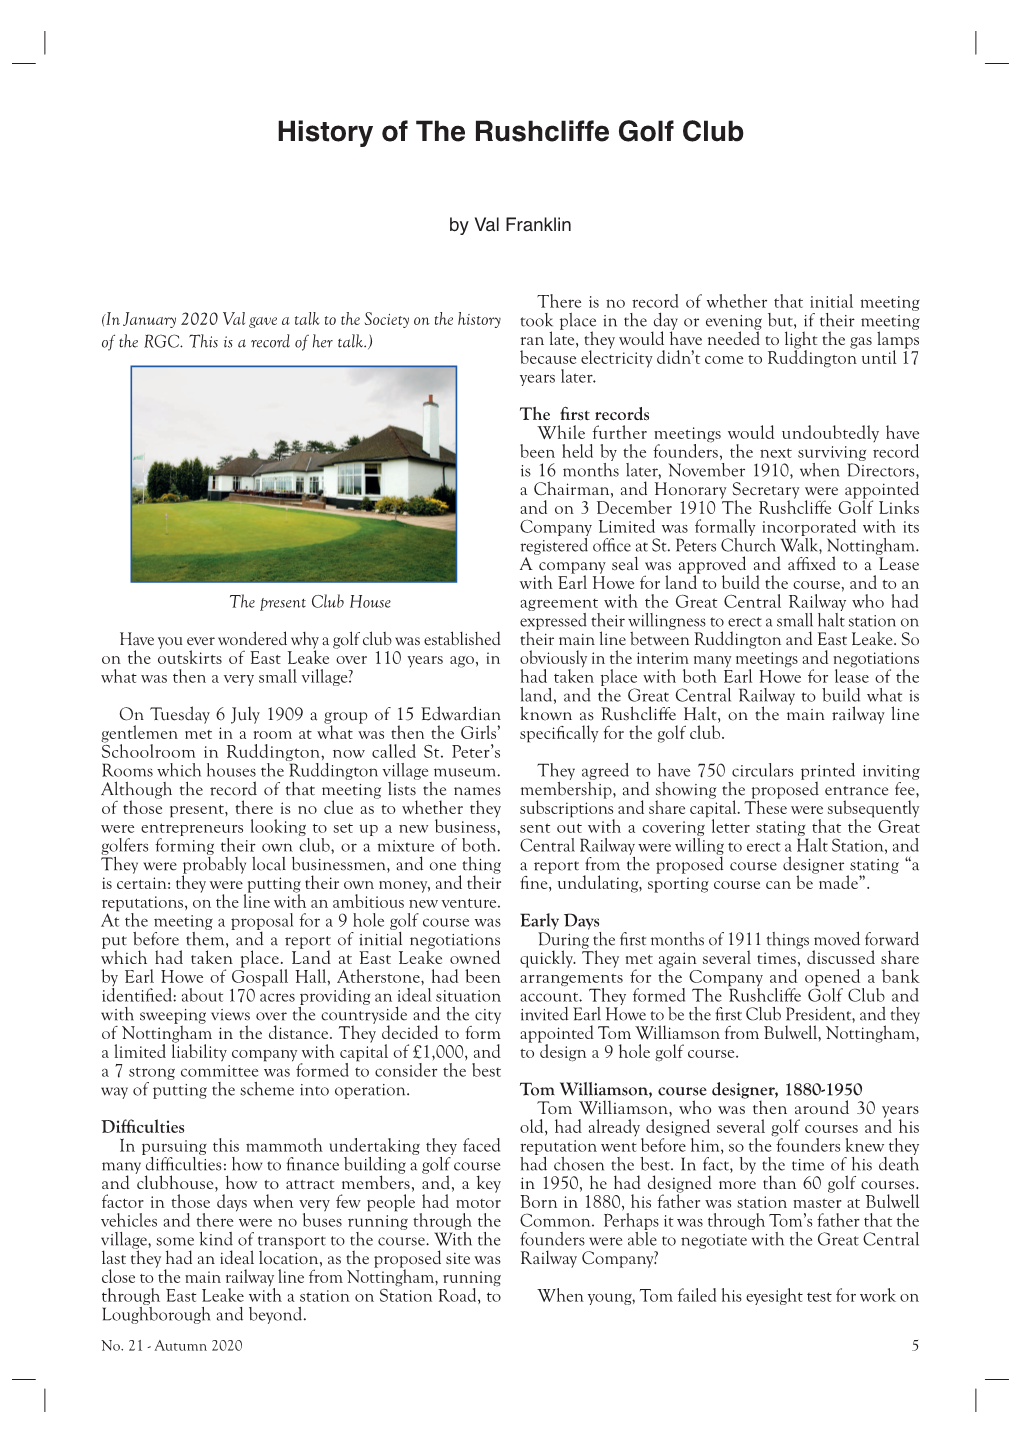 History of the Rushcliffe Golf Club